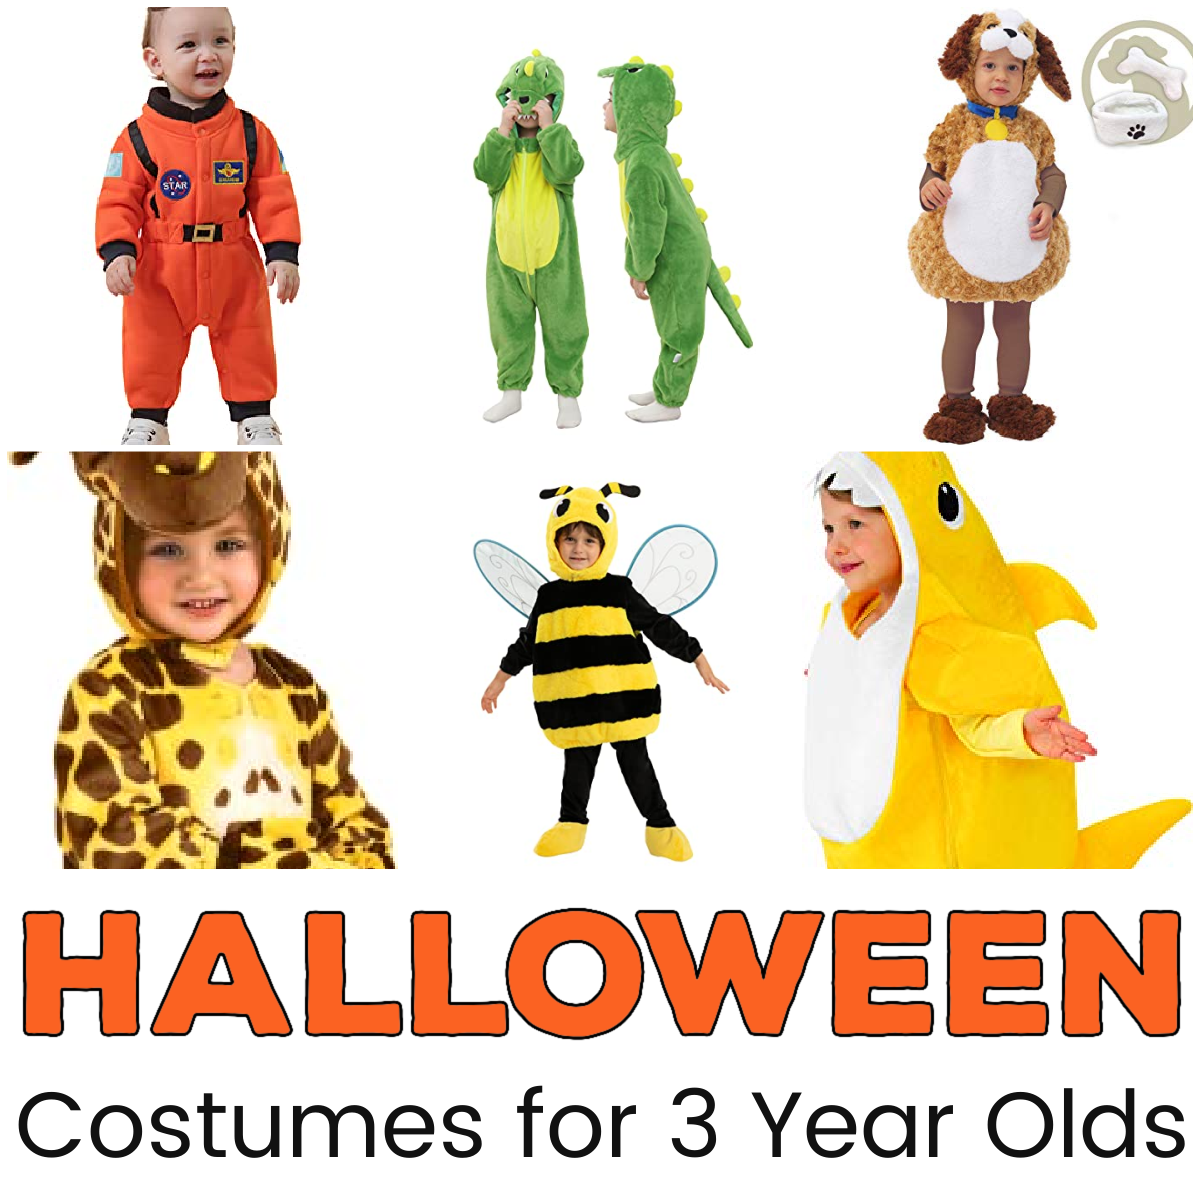 Halloween-costumes-for-3-year-olds-2 Halloween Costumes for 3 Year Old